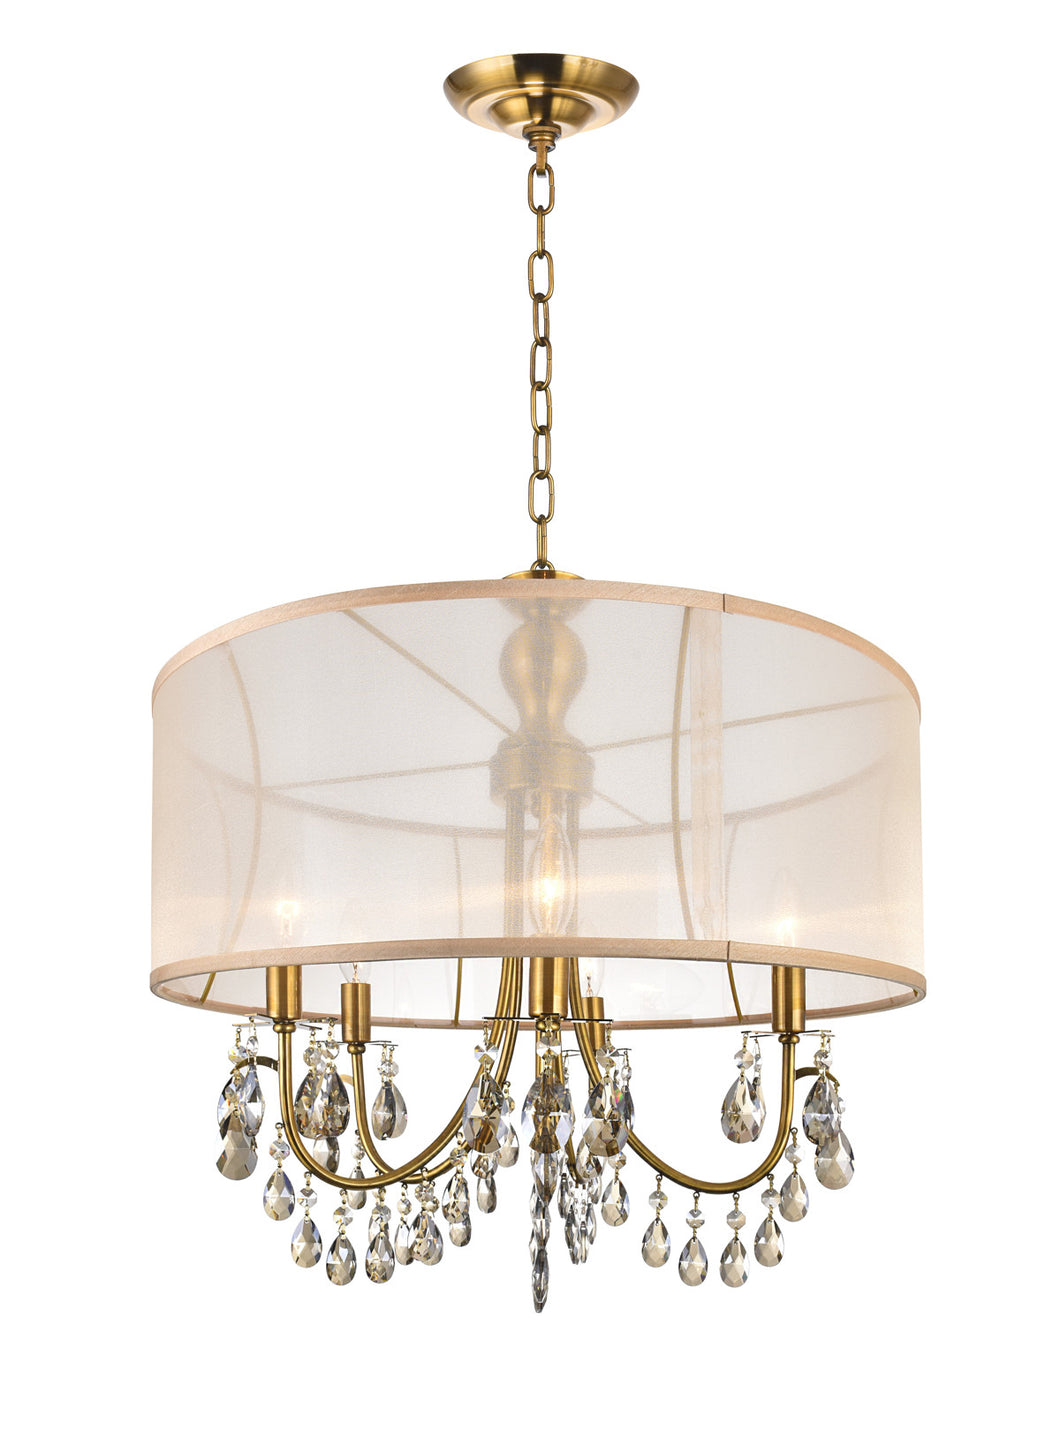 5 Light Drum Shade Chandelier with French Gold finish